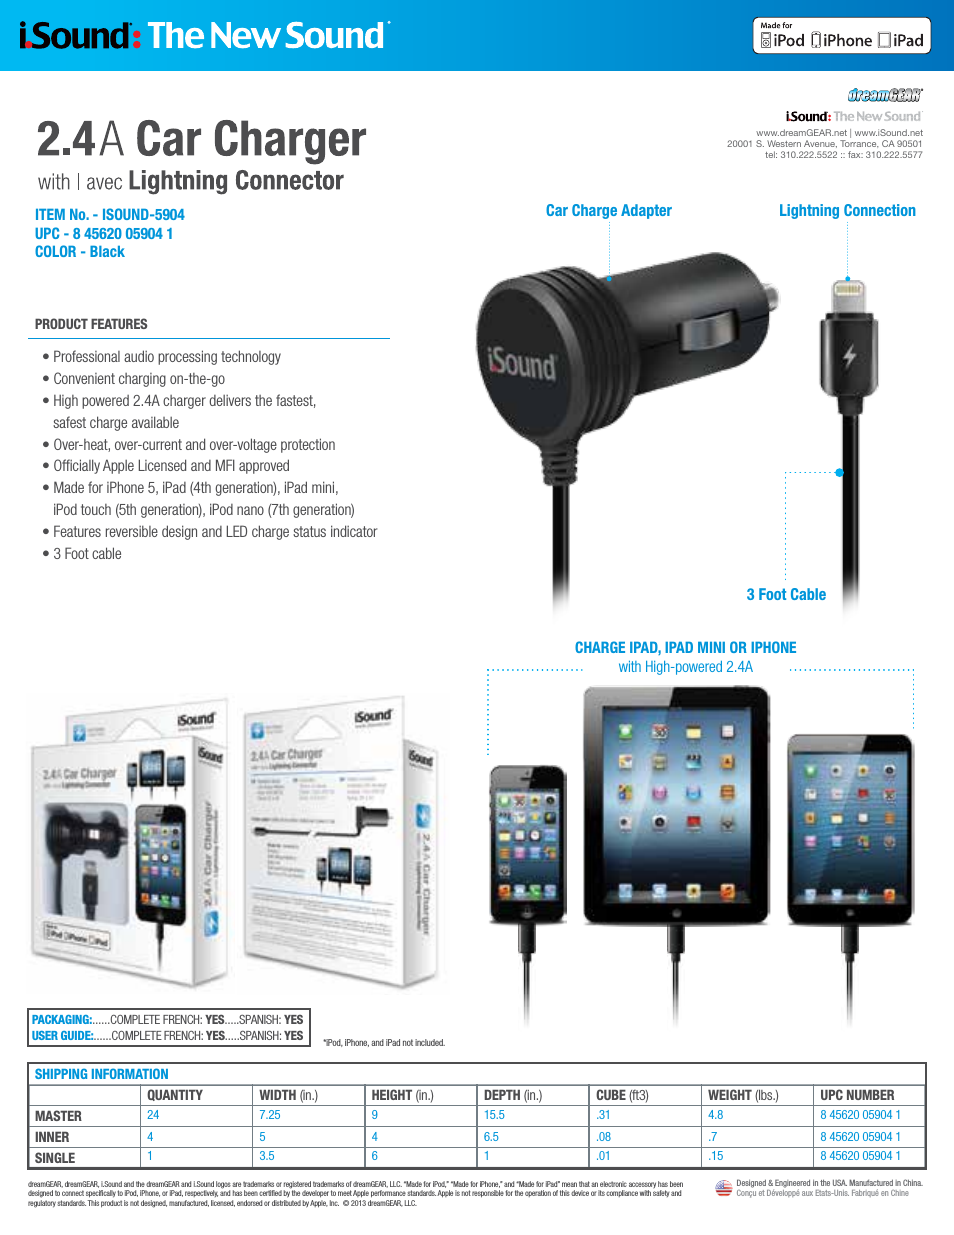 2.4A Car Charger with Lightning Connector - Sell Sheet